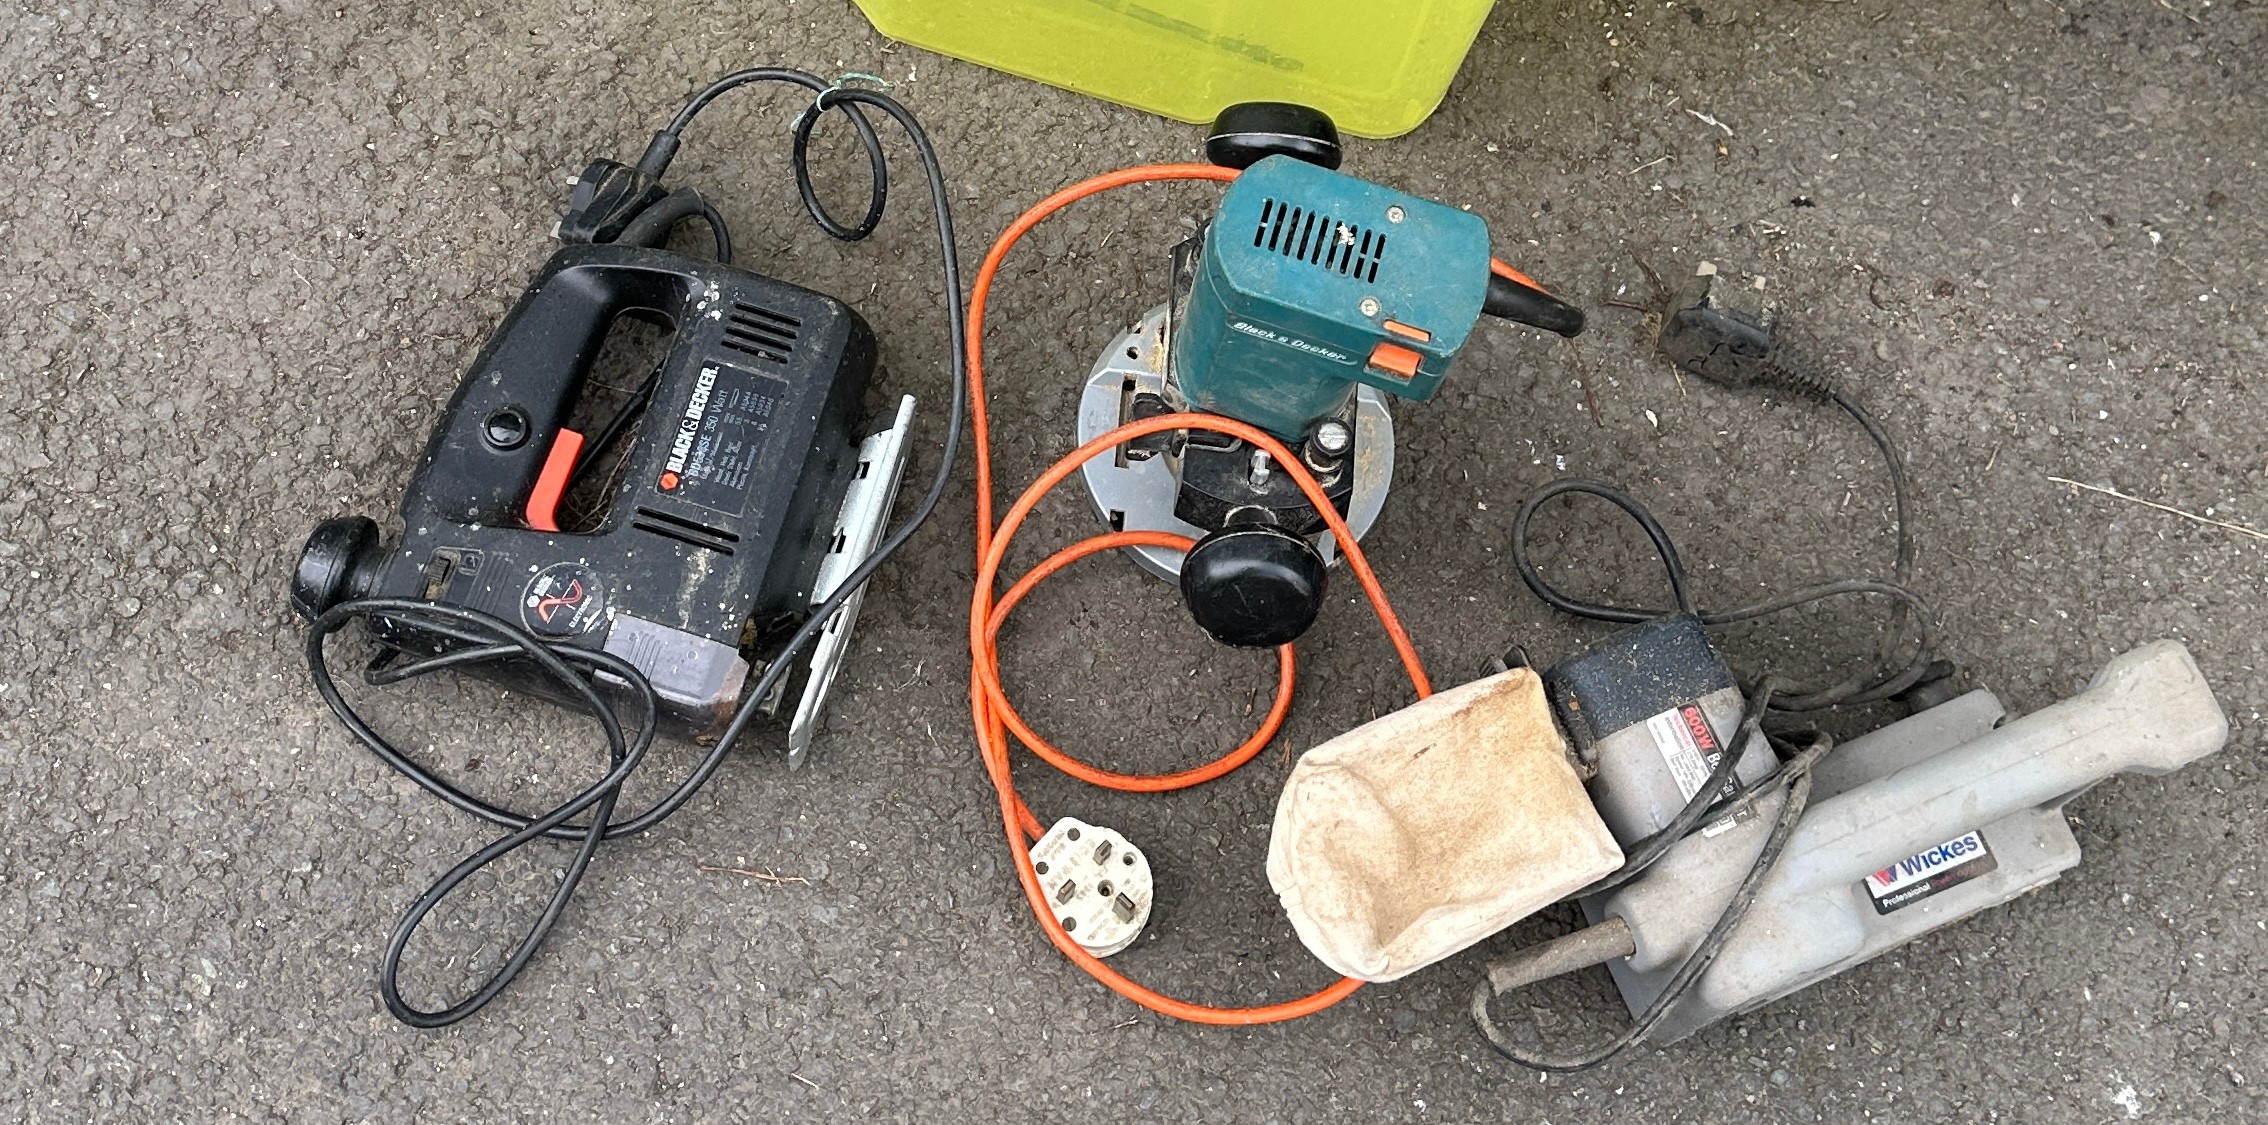 Selection of power tools to include Black and Decker etc - untested